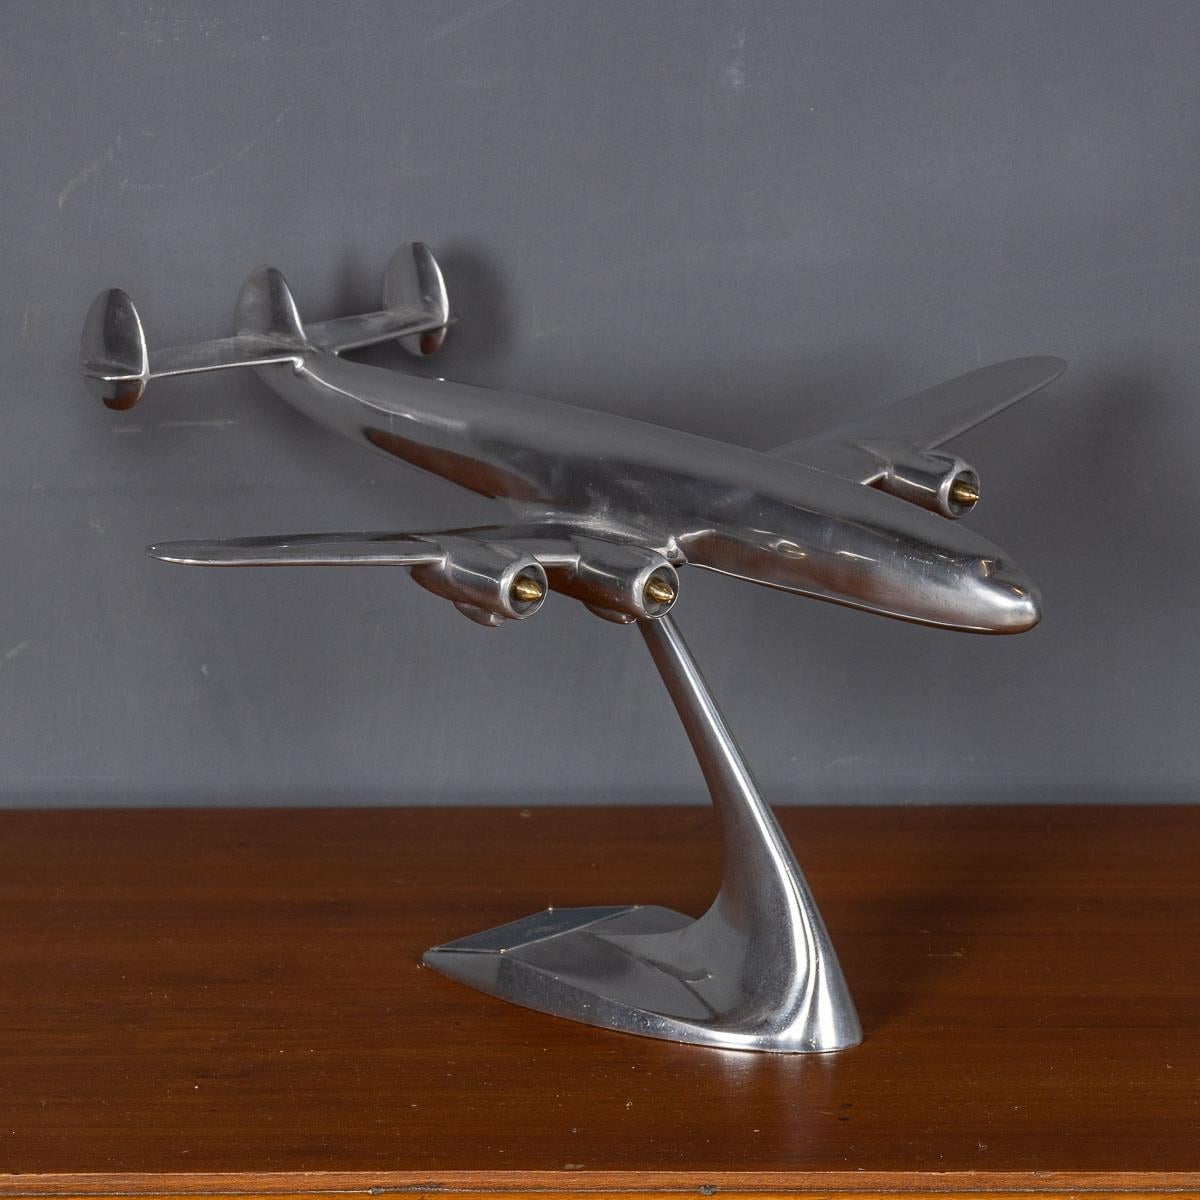 An exquisite 20th Century model of a Qantas Empire Airways Super Constellation, expertly crafted from aluminium and presented on a matching aluminium base. This remarkable piece serves as a captivating focal point, perfect for sparking intriguing